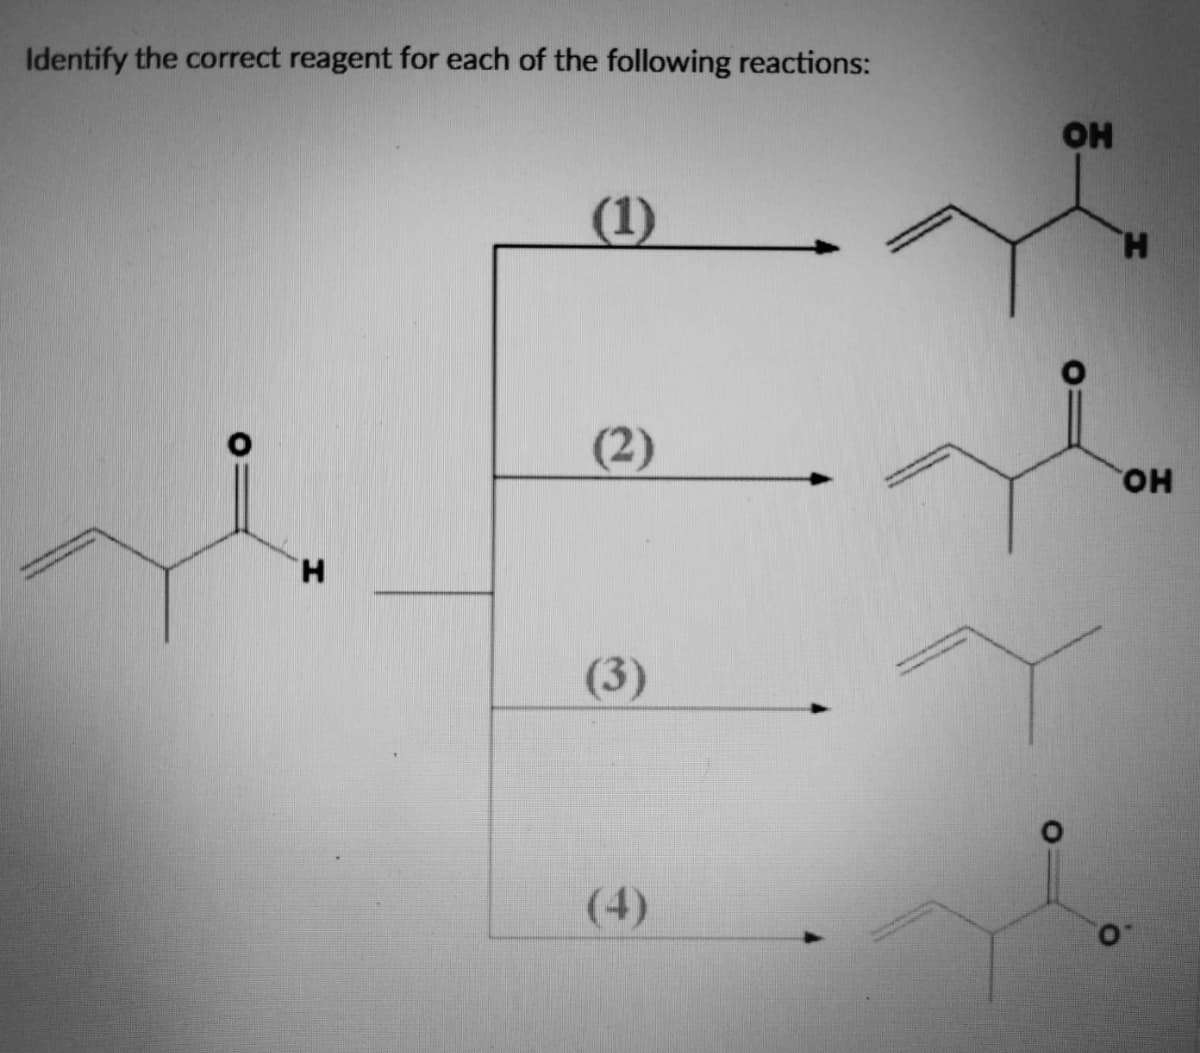 Identify the correct reagent for each of the following reactions:
H
(1)
(2)
(3)
(4)
ОН
Н
ОН
О